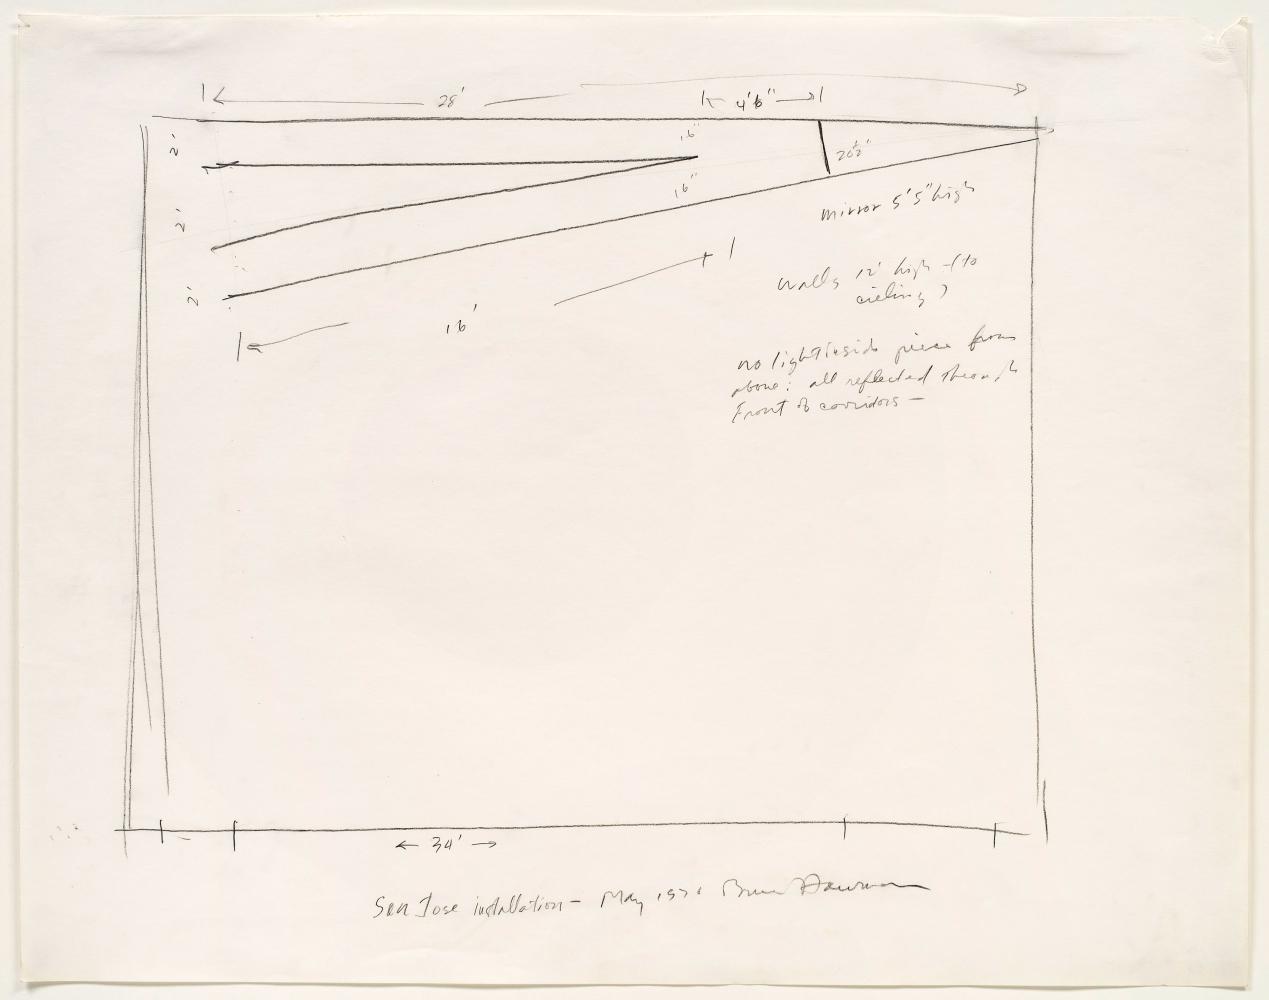 pencil drawing on paper of an installation plan with handwritten notes by the artist